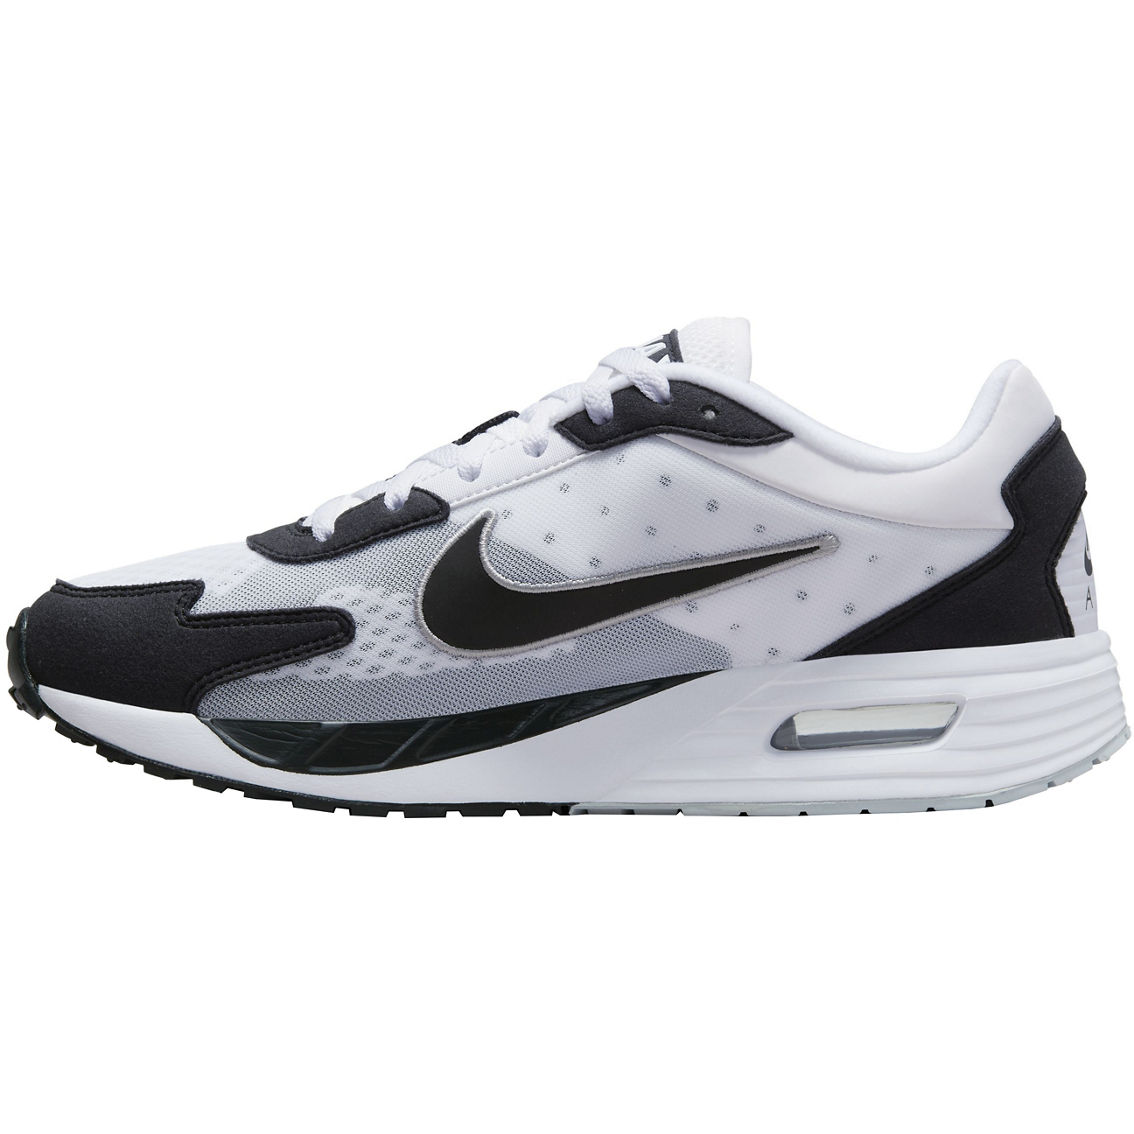 Nike Men's Air Max Solo Running Shoes - Image 3 of 10